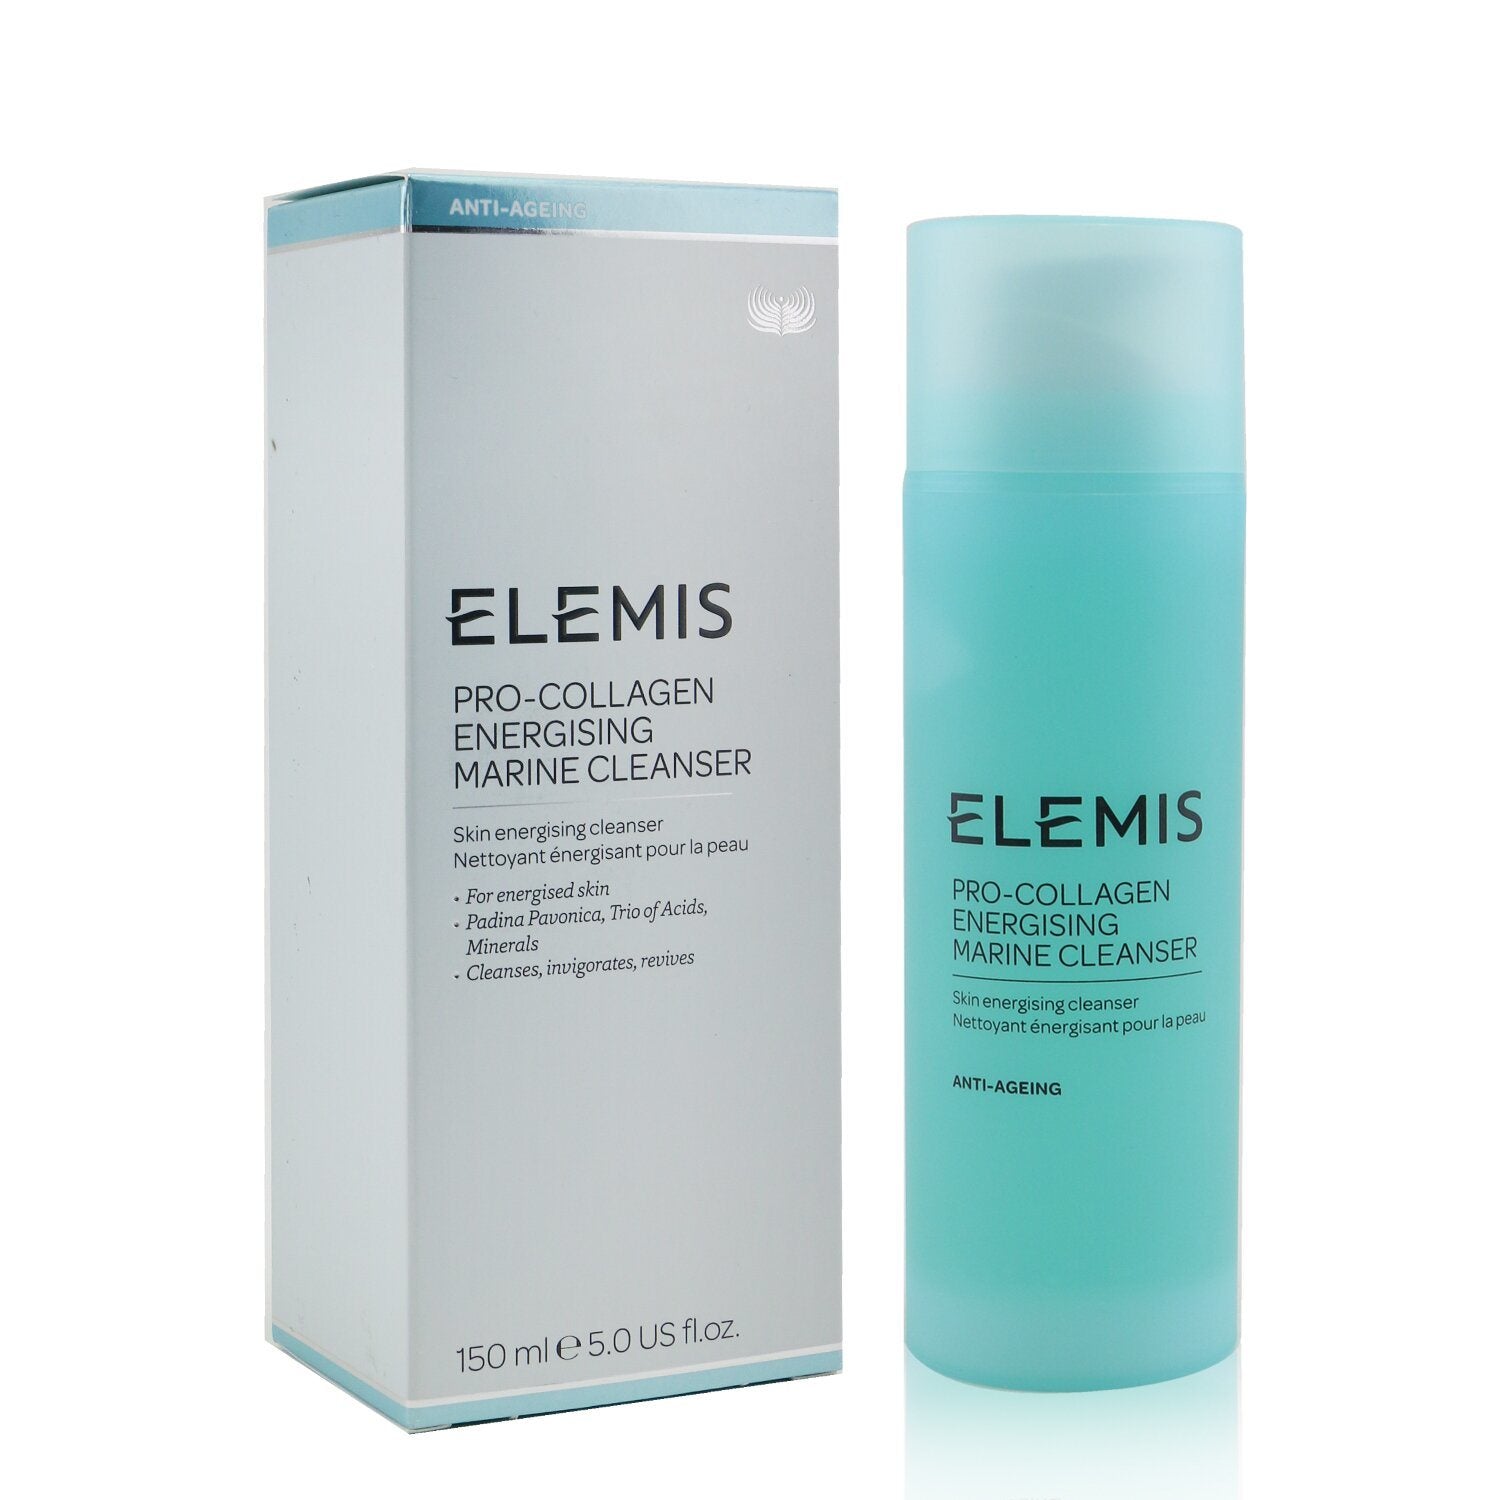 Elemis Pro-Collagen Energising Marine Cleanser effectively hydrates and thoroughly removes grime, showcased on a clean white background.